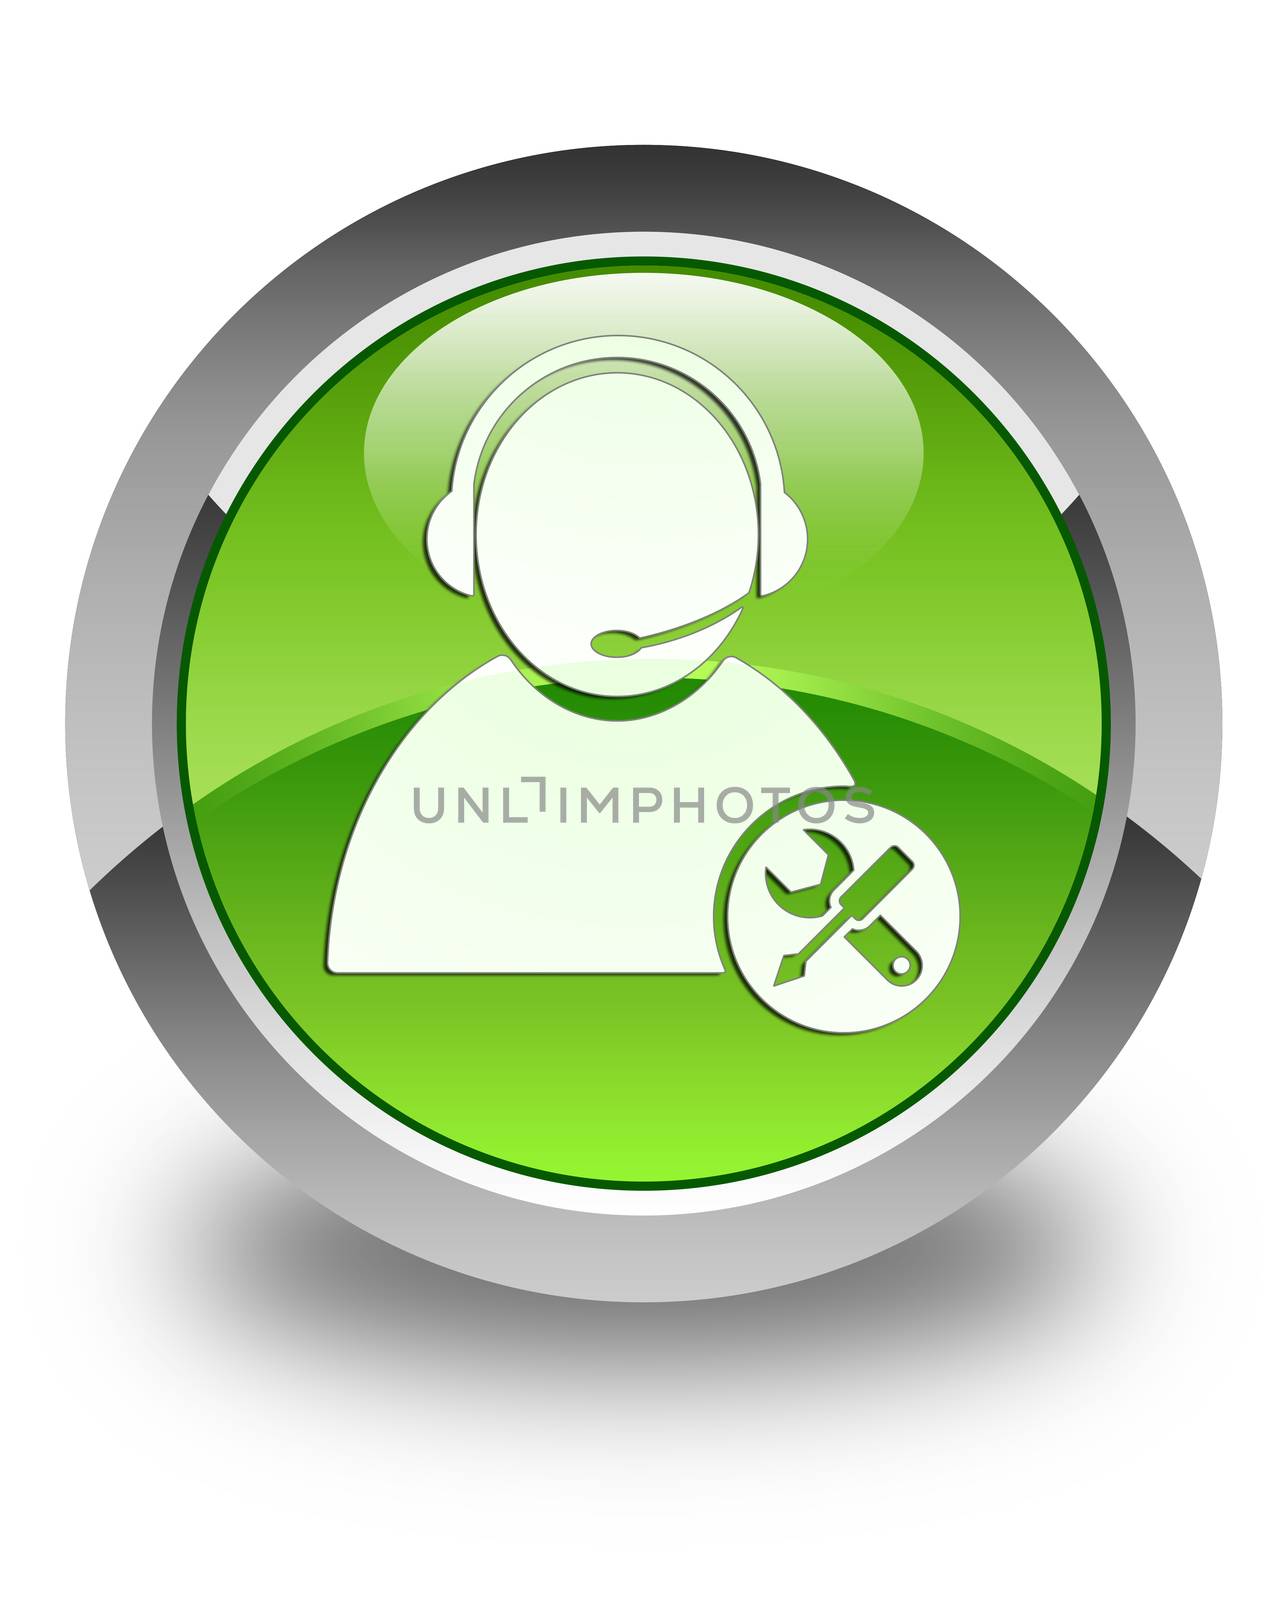 Tech support icon glossy green round button by faysalfarhan